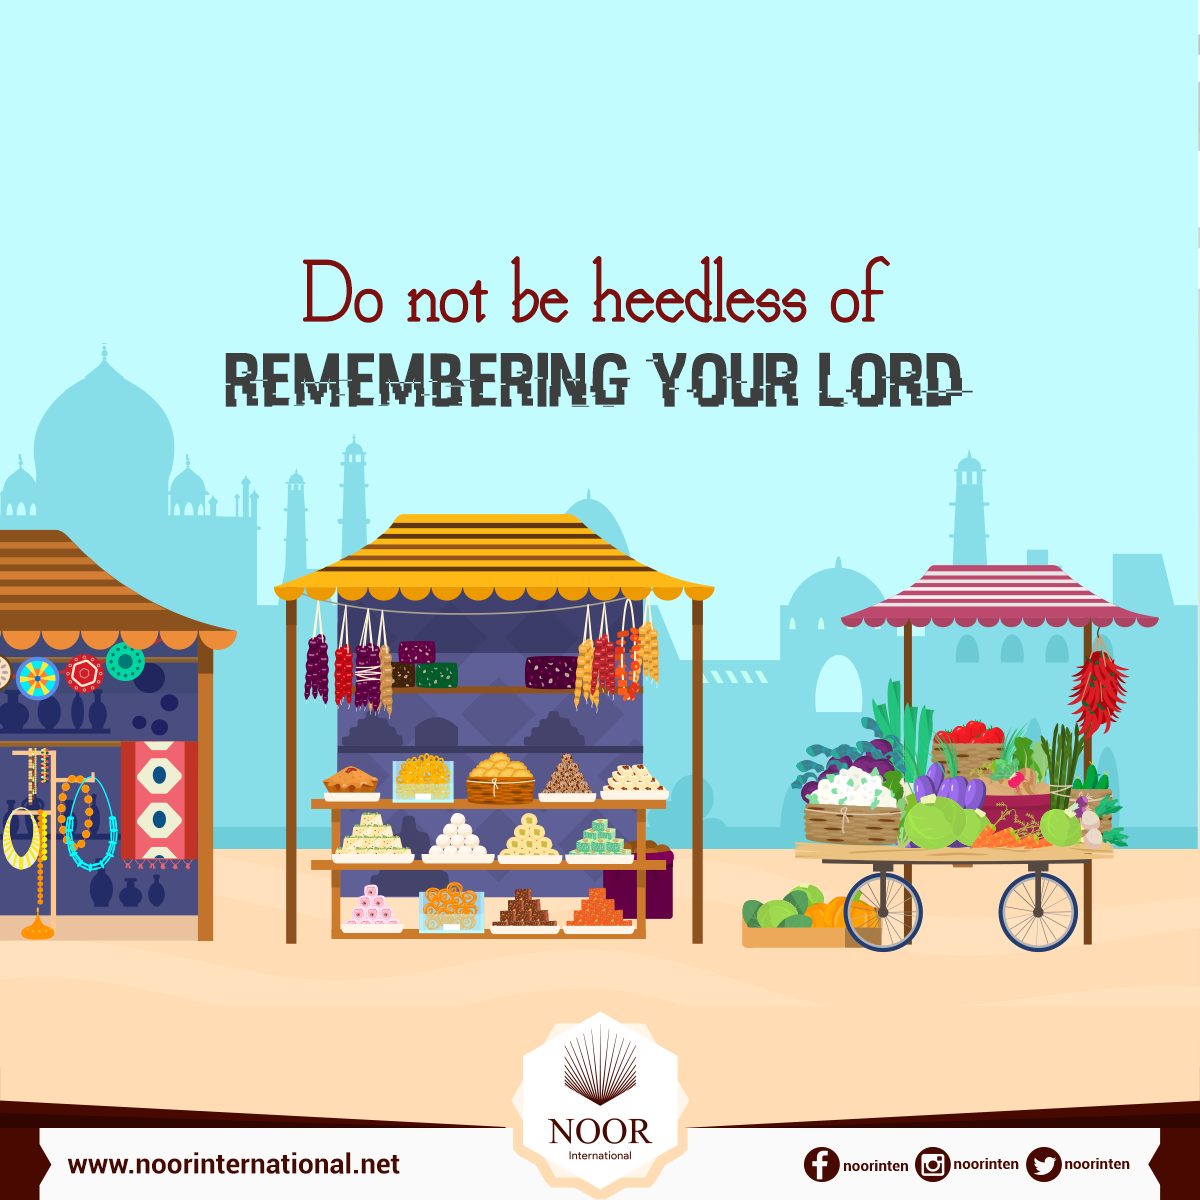 Do not be heedless of remembering your Lord